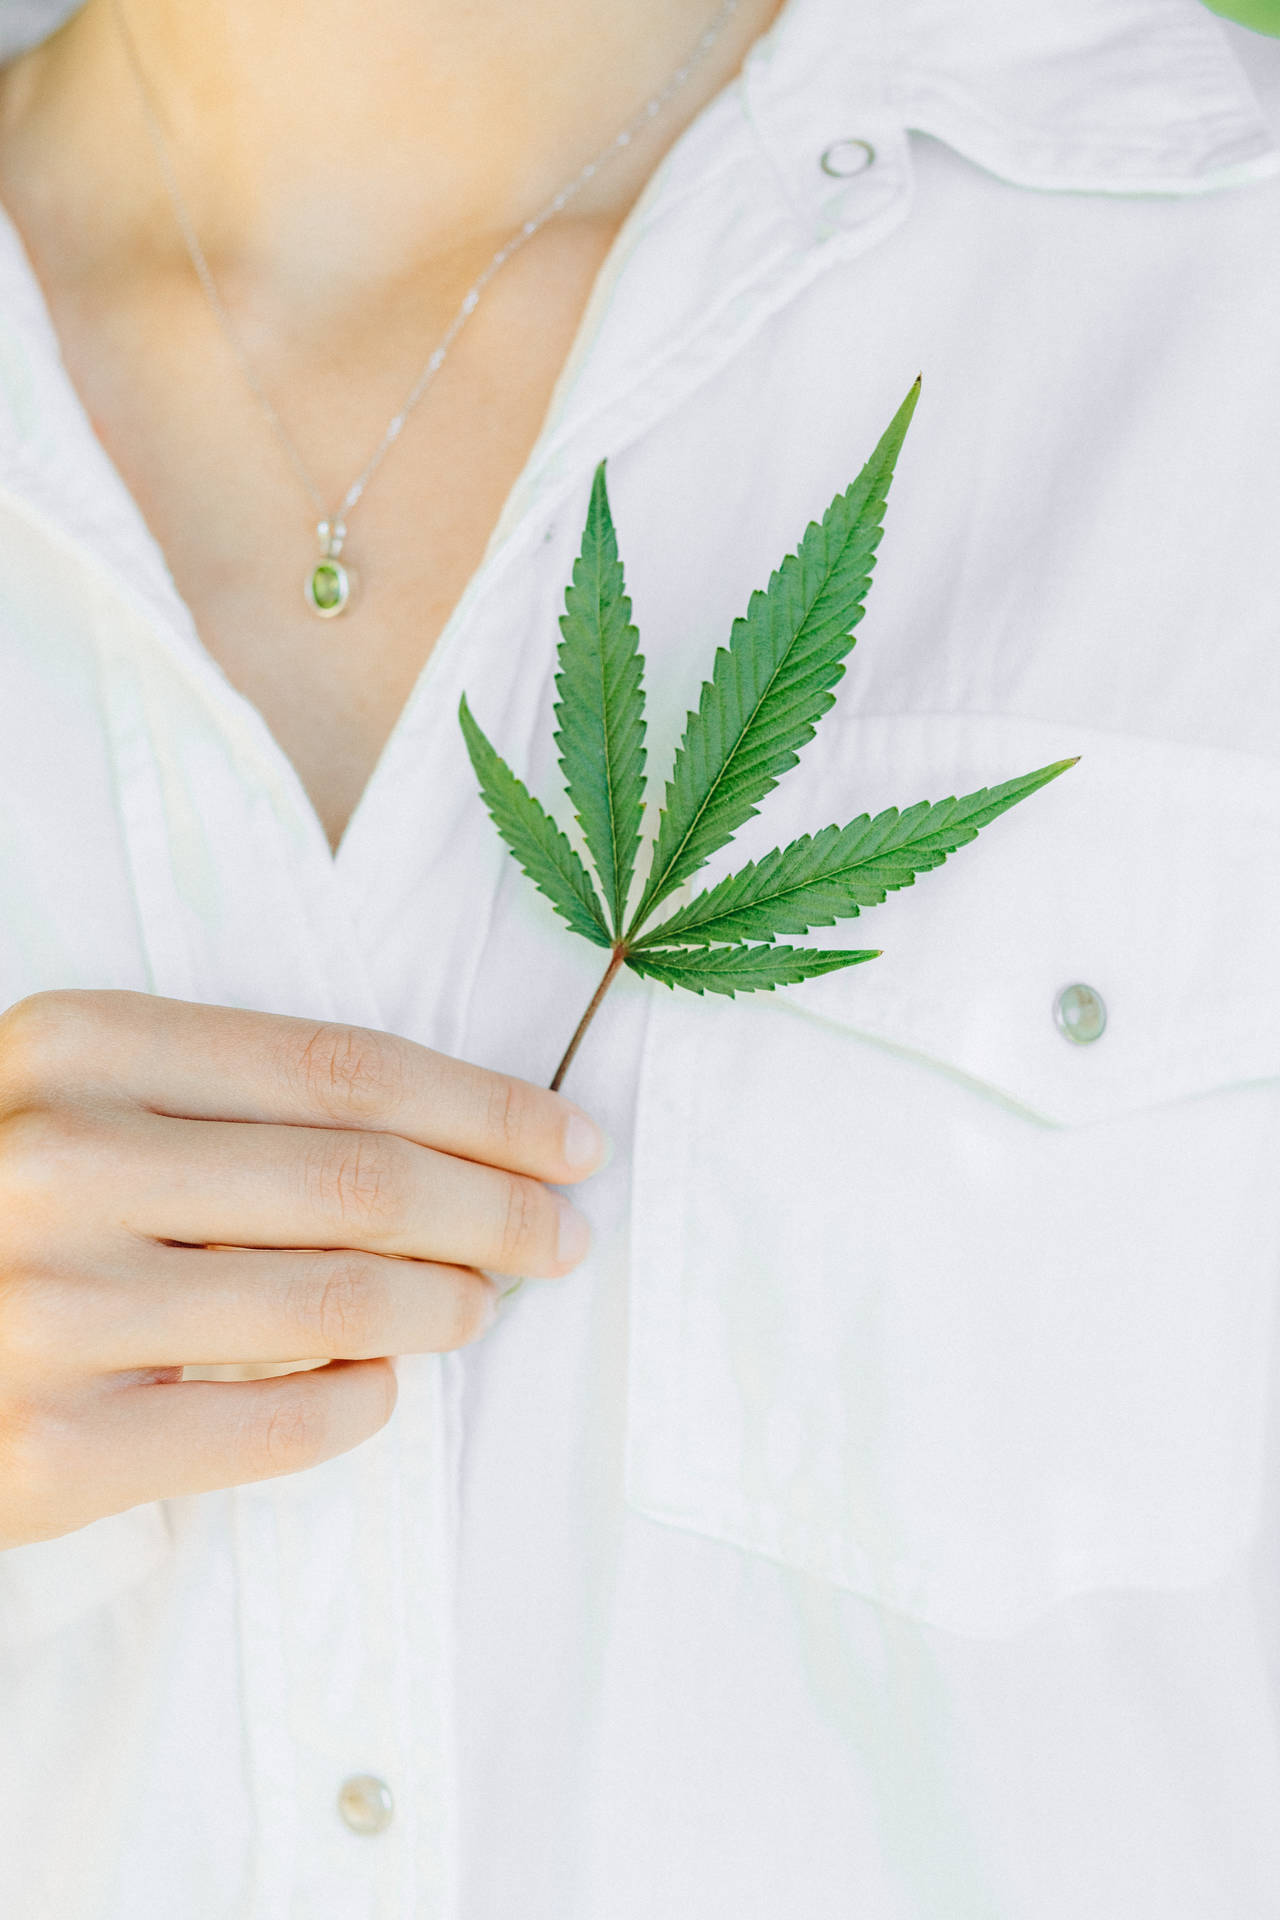 Cool Weed Leaf On White Blouse Background